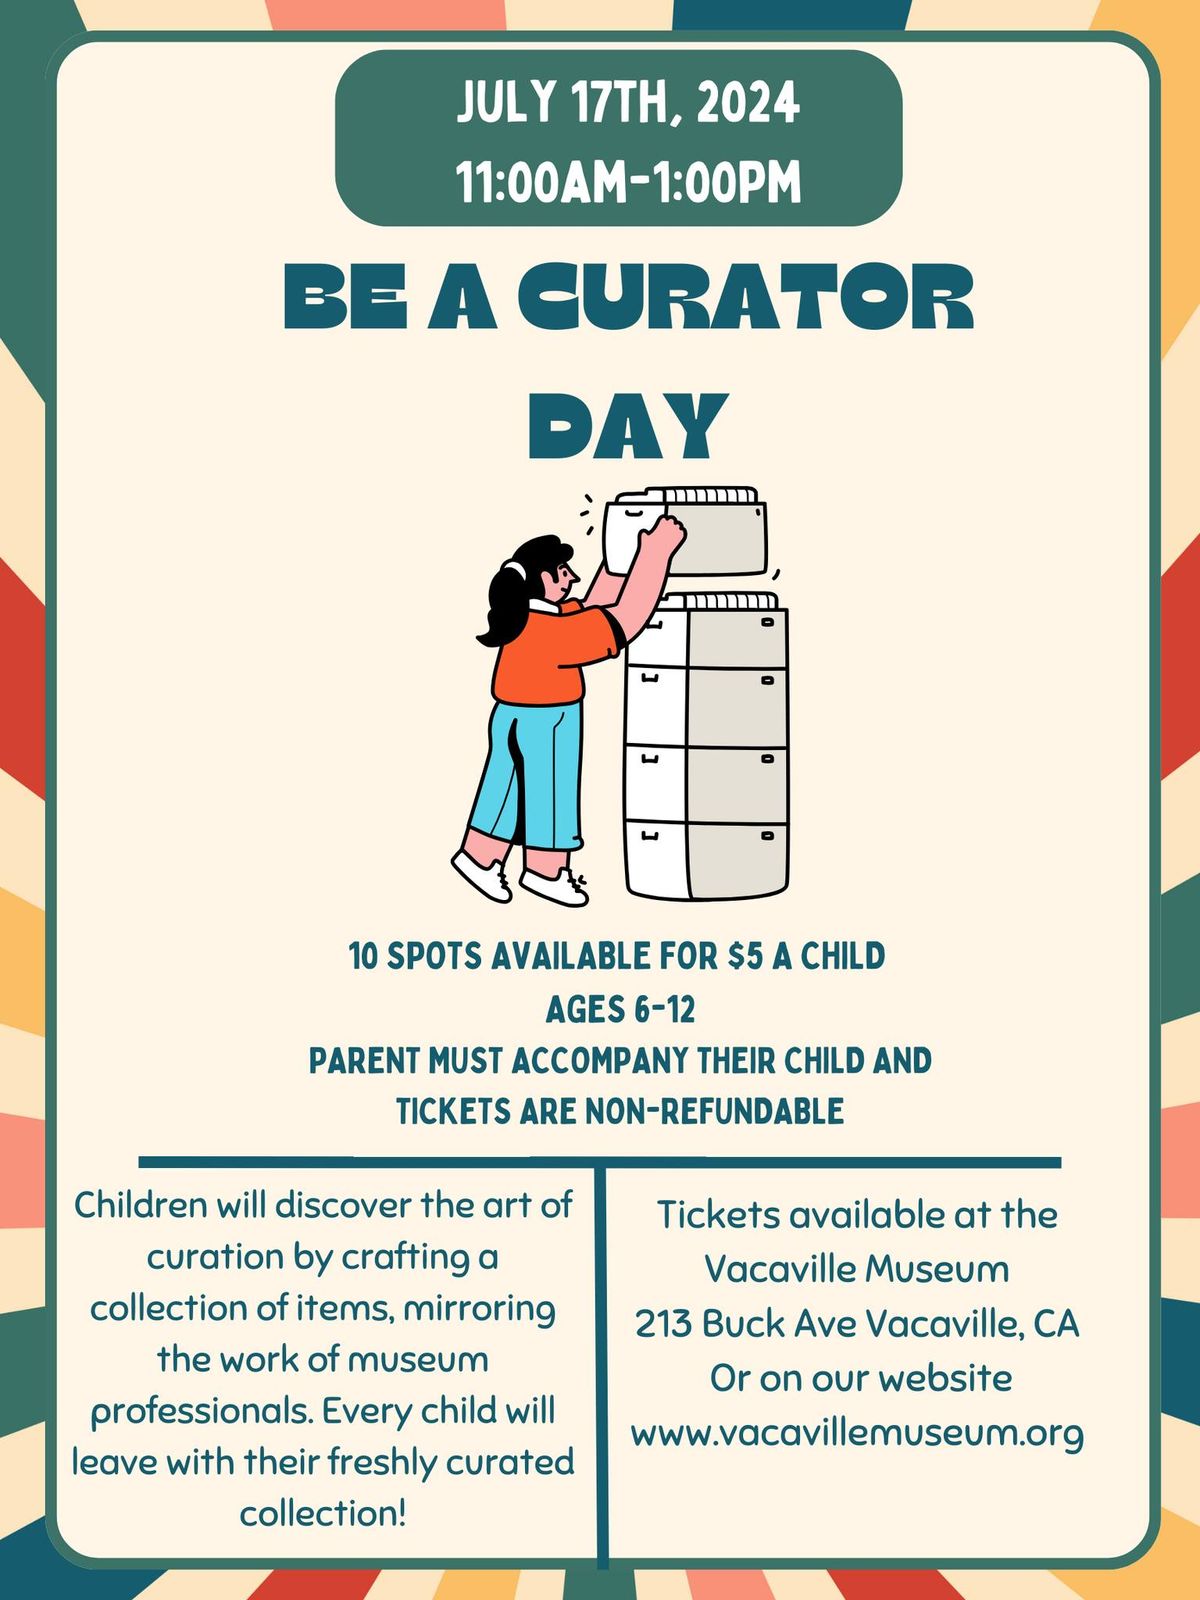 Be a Curator Day!